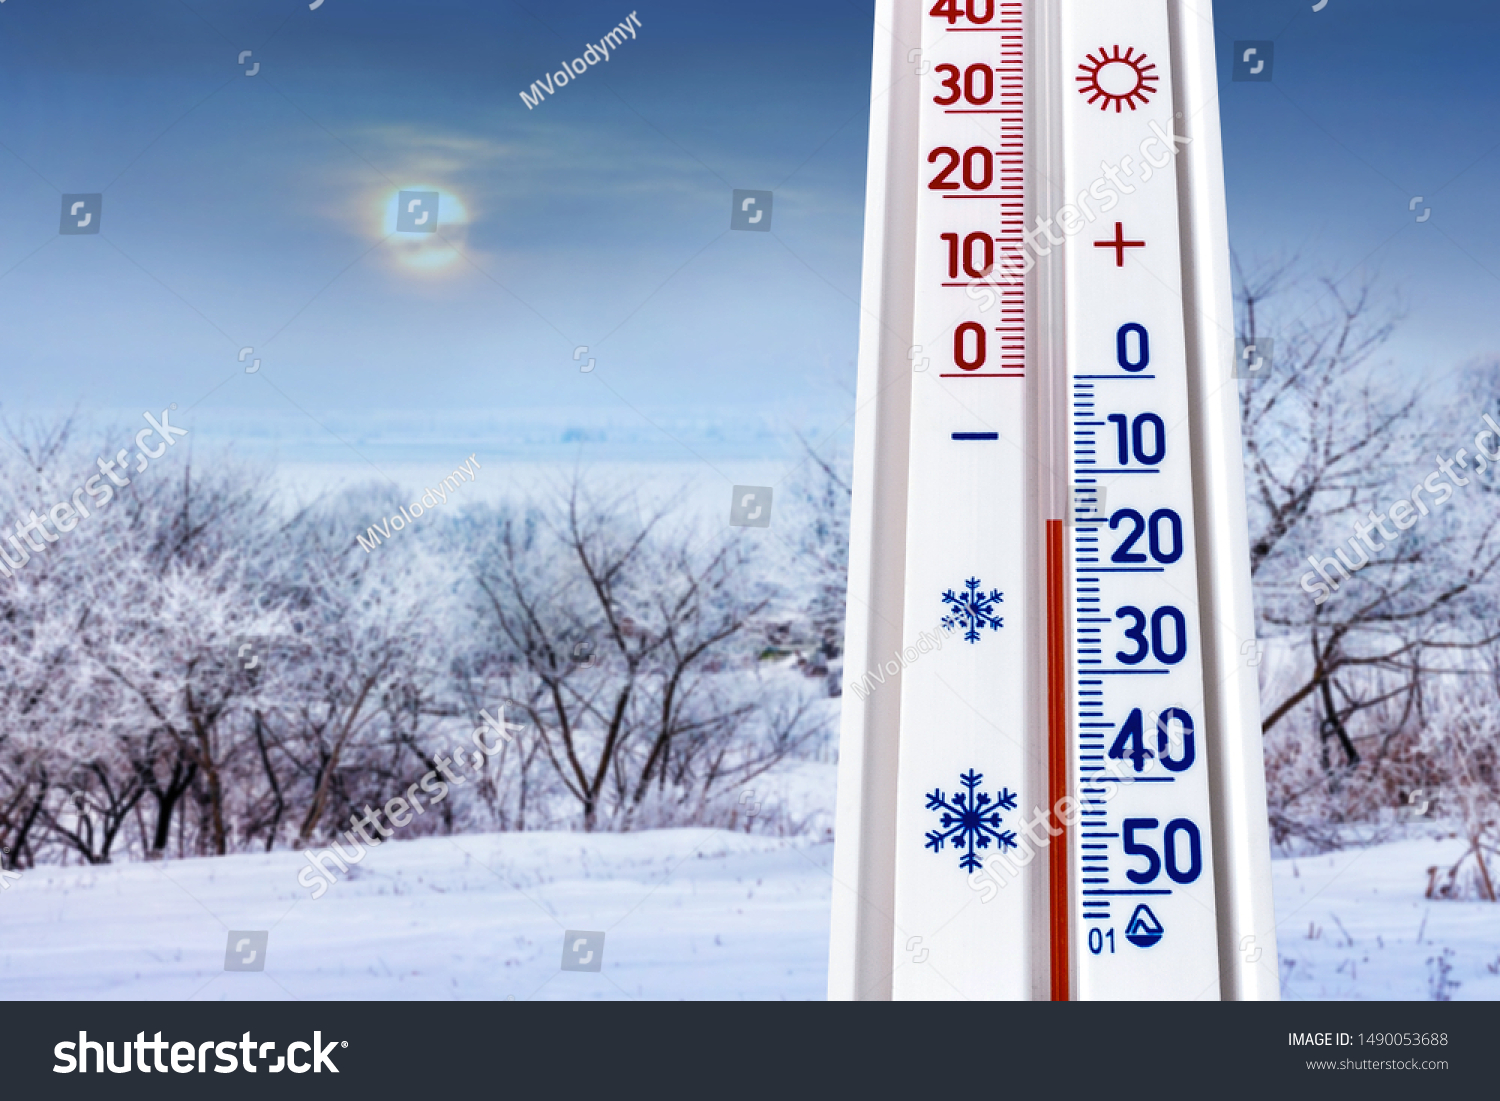 Stock Photo The Thermometer On A Background Of Winter Landscape Shows Degrees Of Frost Cold Weather In 1490053688 